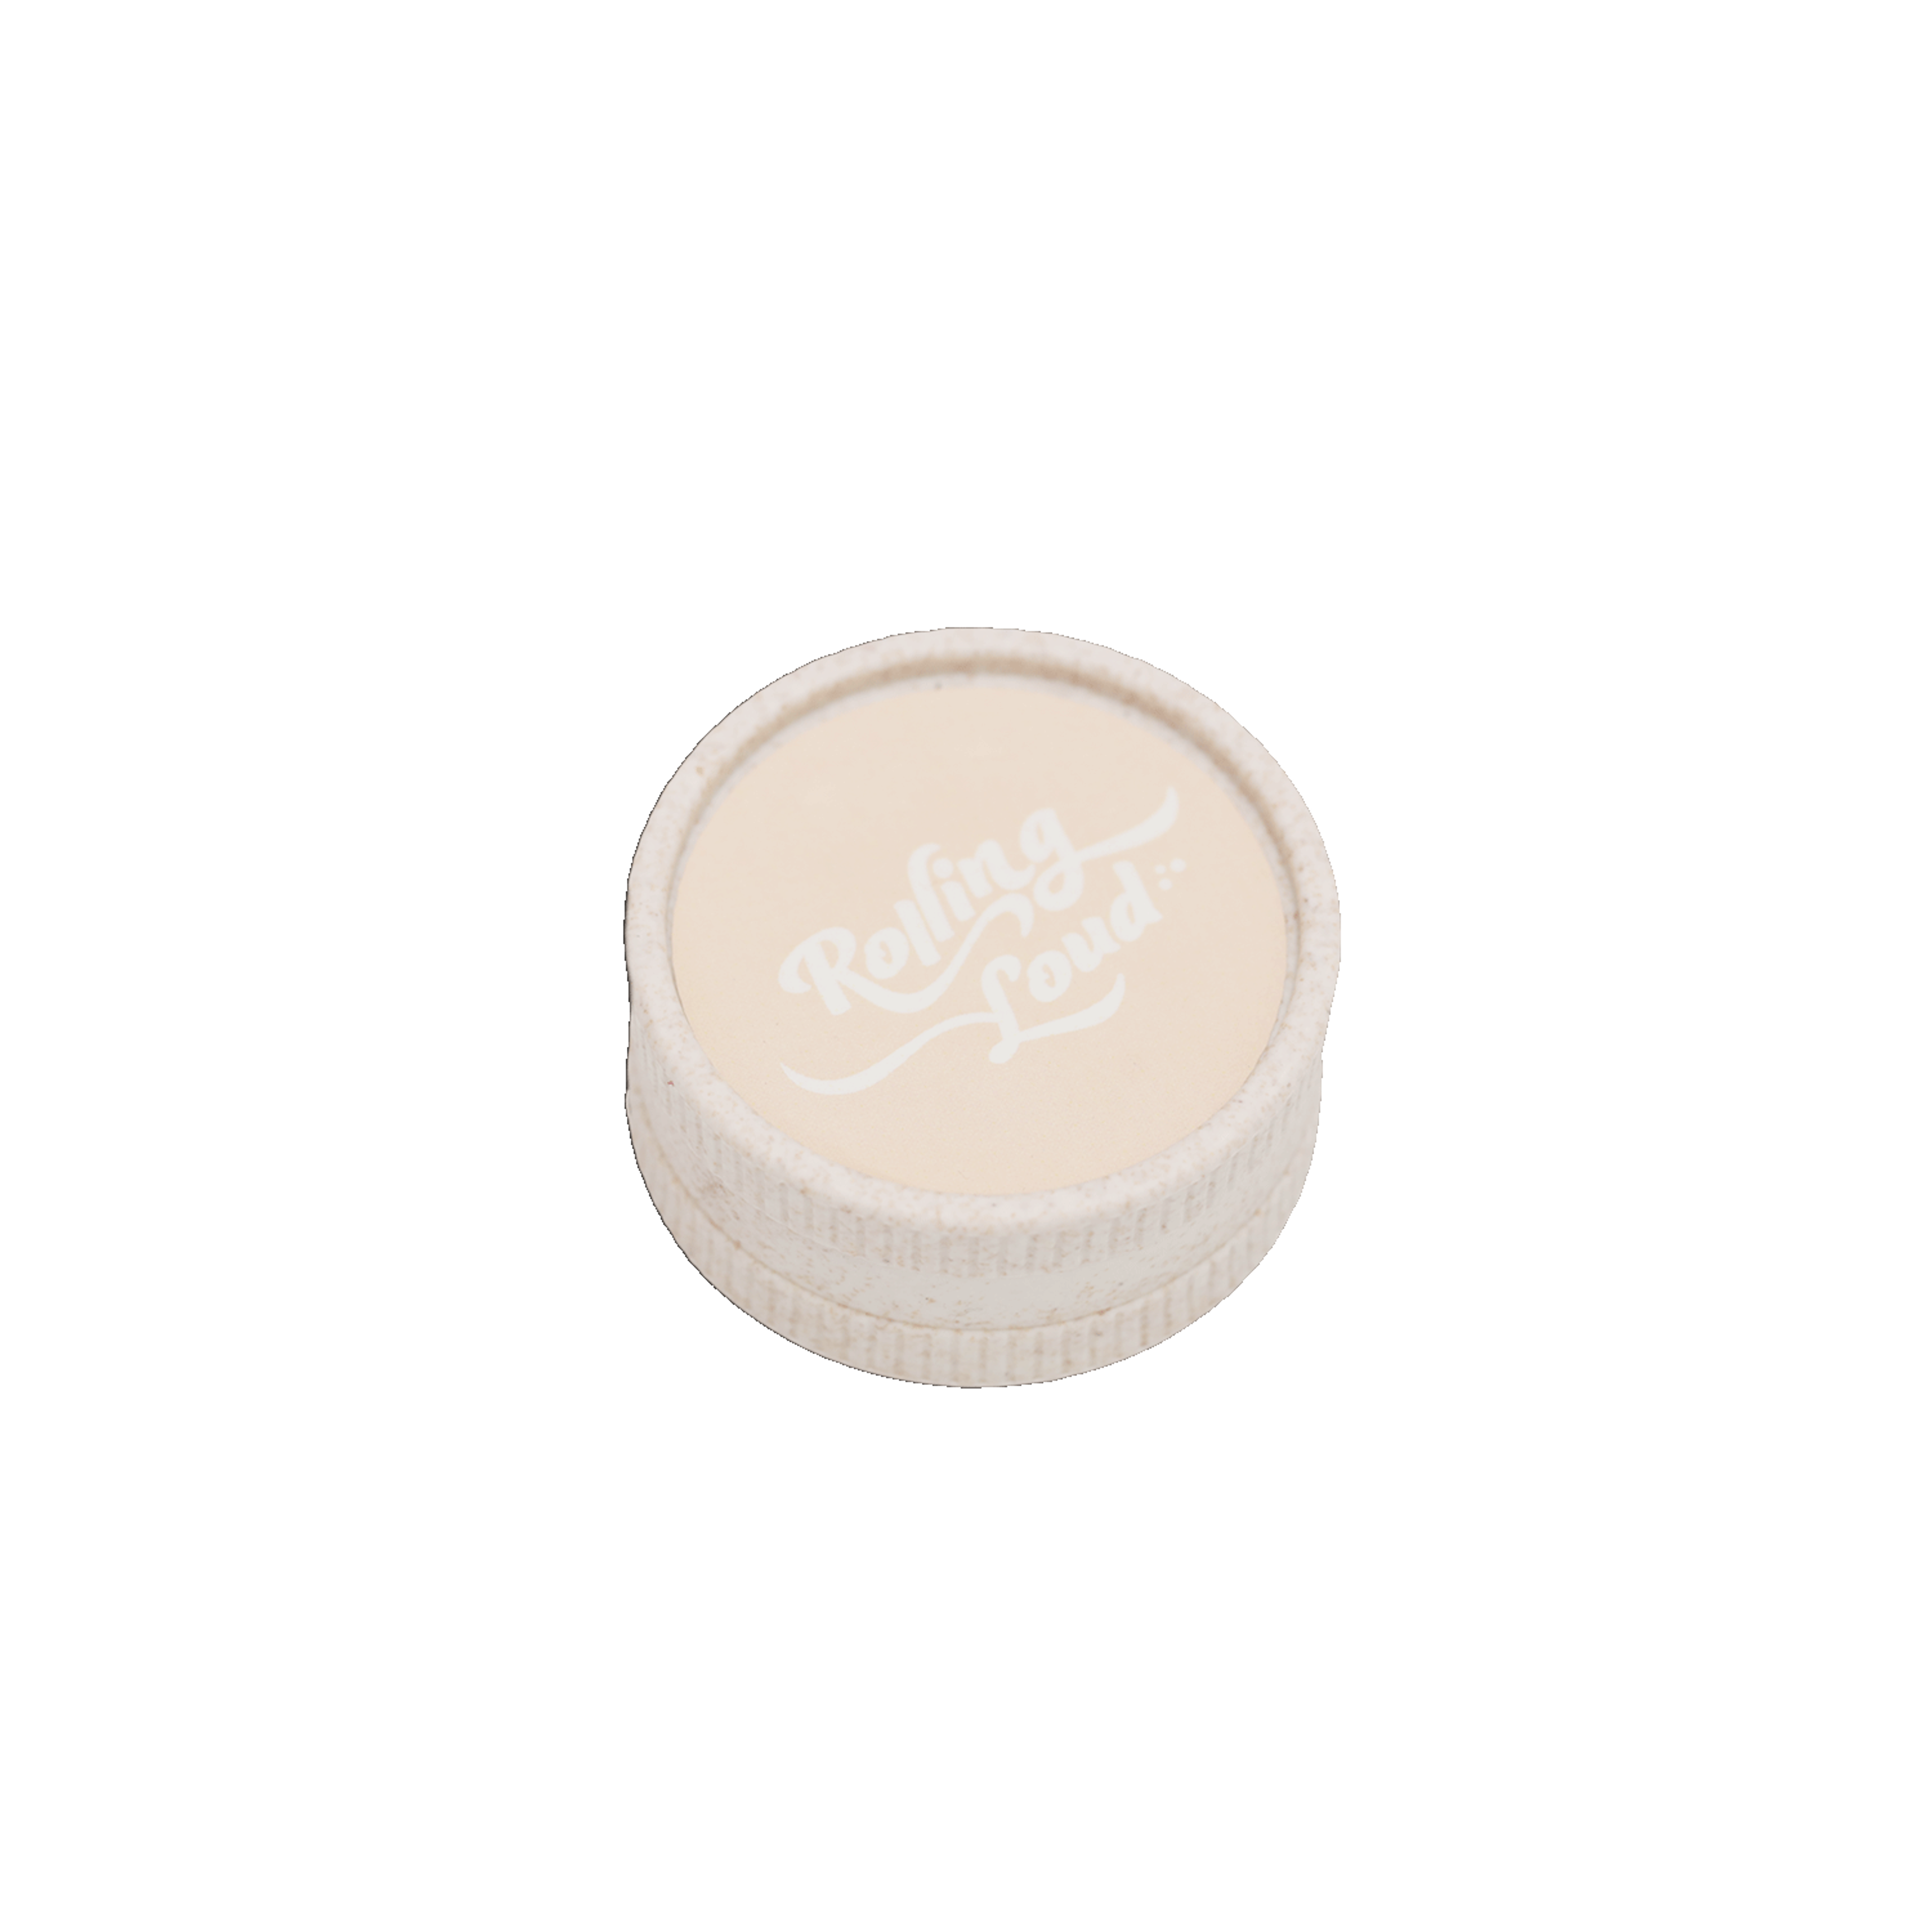 Rolling Loud 2 Chamber Plastic White Grinder